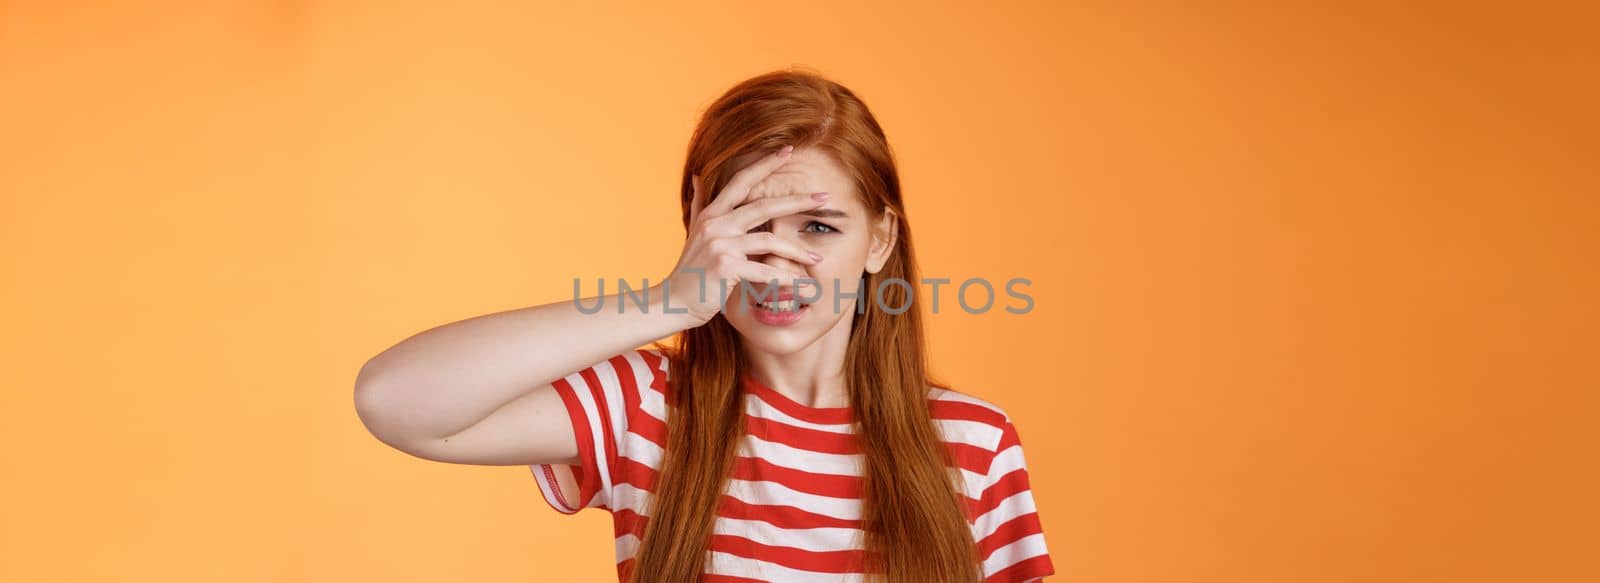 Uneasy redhead girl pity for bad situation, trying not look awful friend wound, cringe aversion, dislike watch horror stories, feel disgust upset, standing uncomfortable clench teeth dislike.